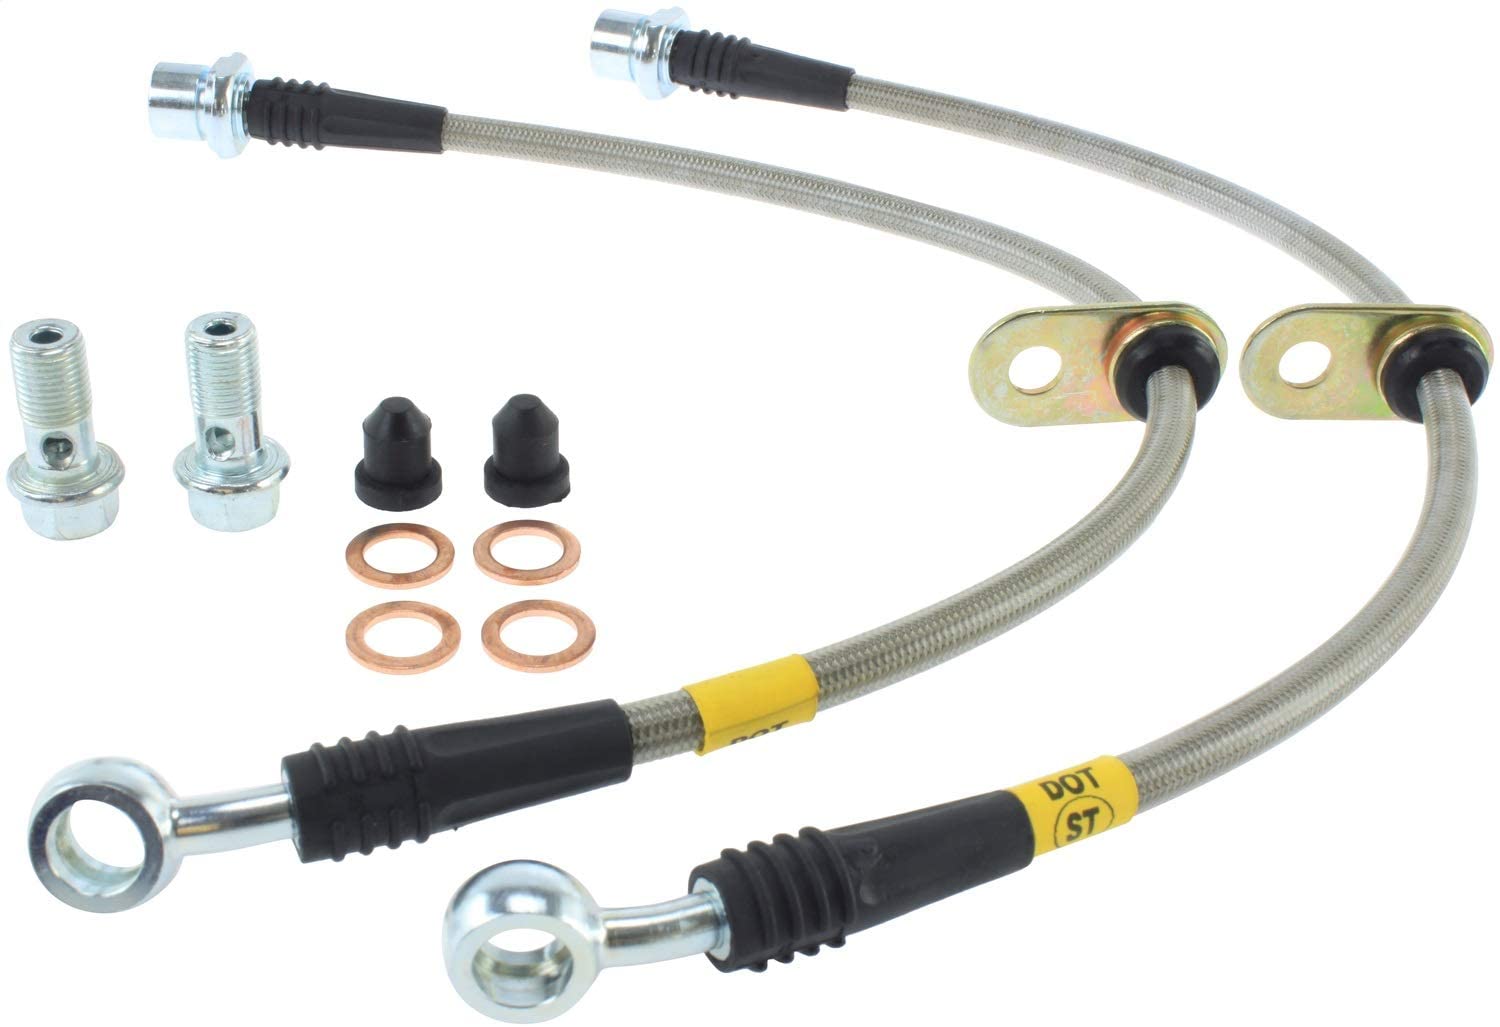 STOPTECH 950.34501 Rear Stainless Steel Brake Line Kit BMW 323i/325i/325is/328i 1991-1999 Photo-1 